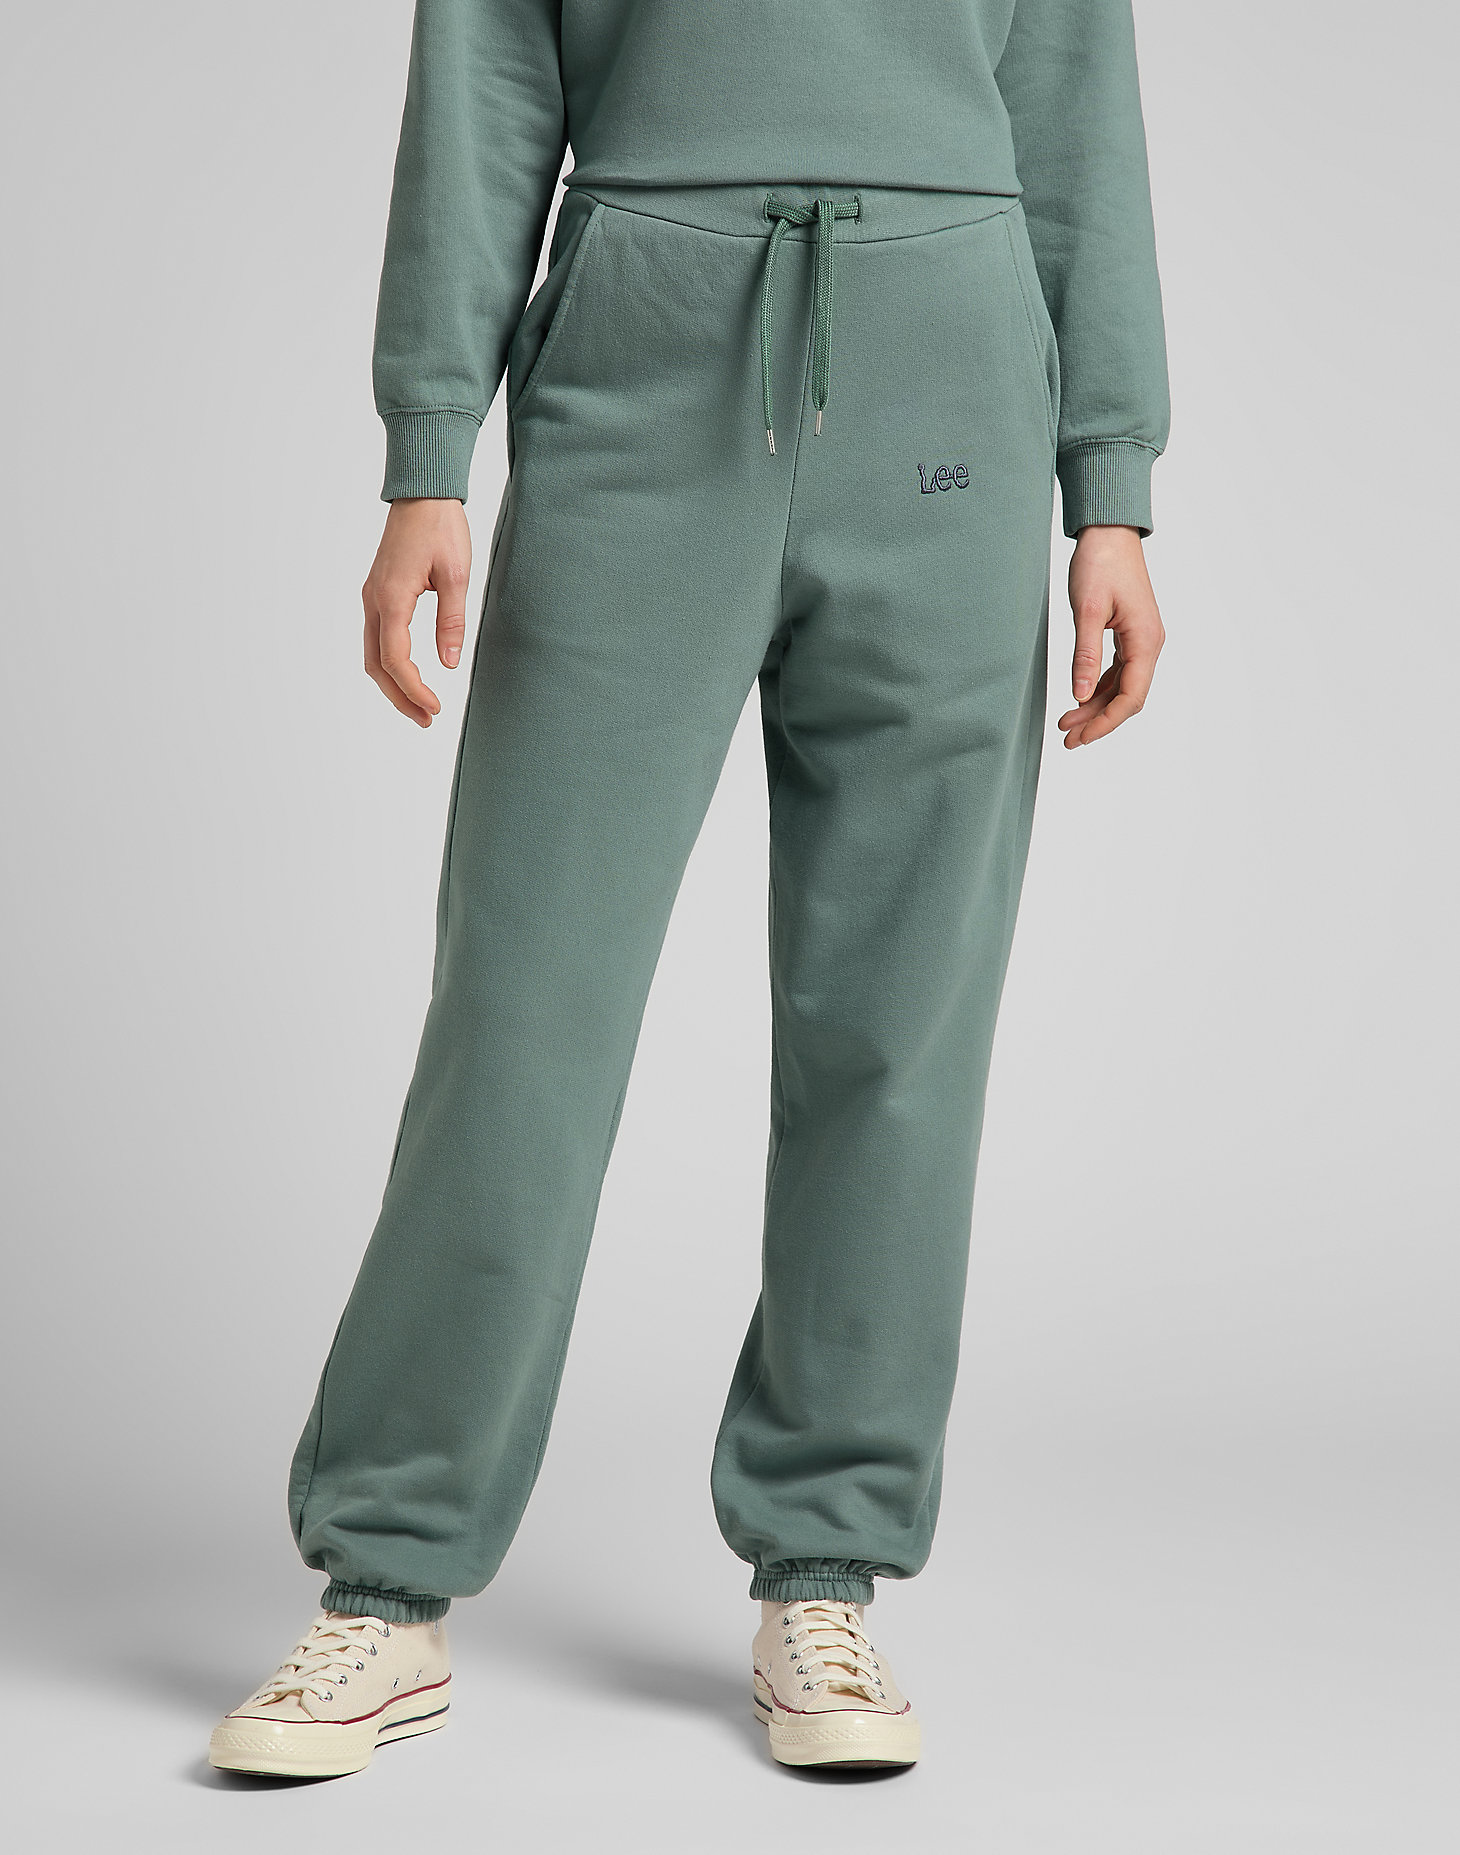 Relaxed Sweatpants in Steel Green alternative view 1